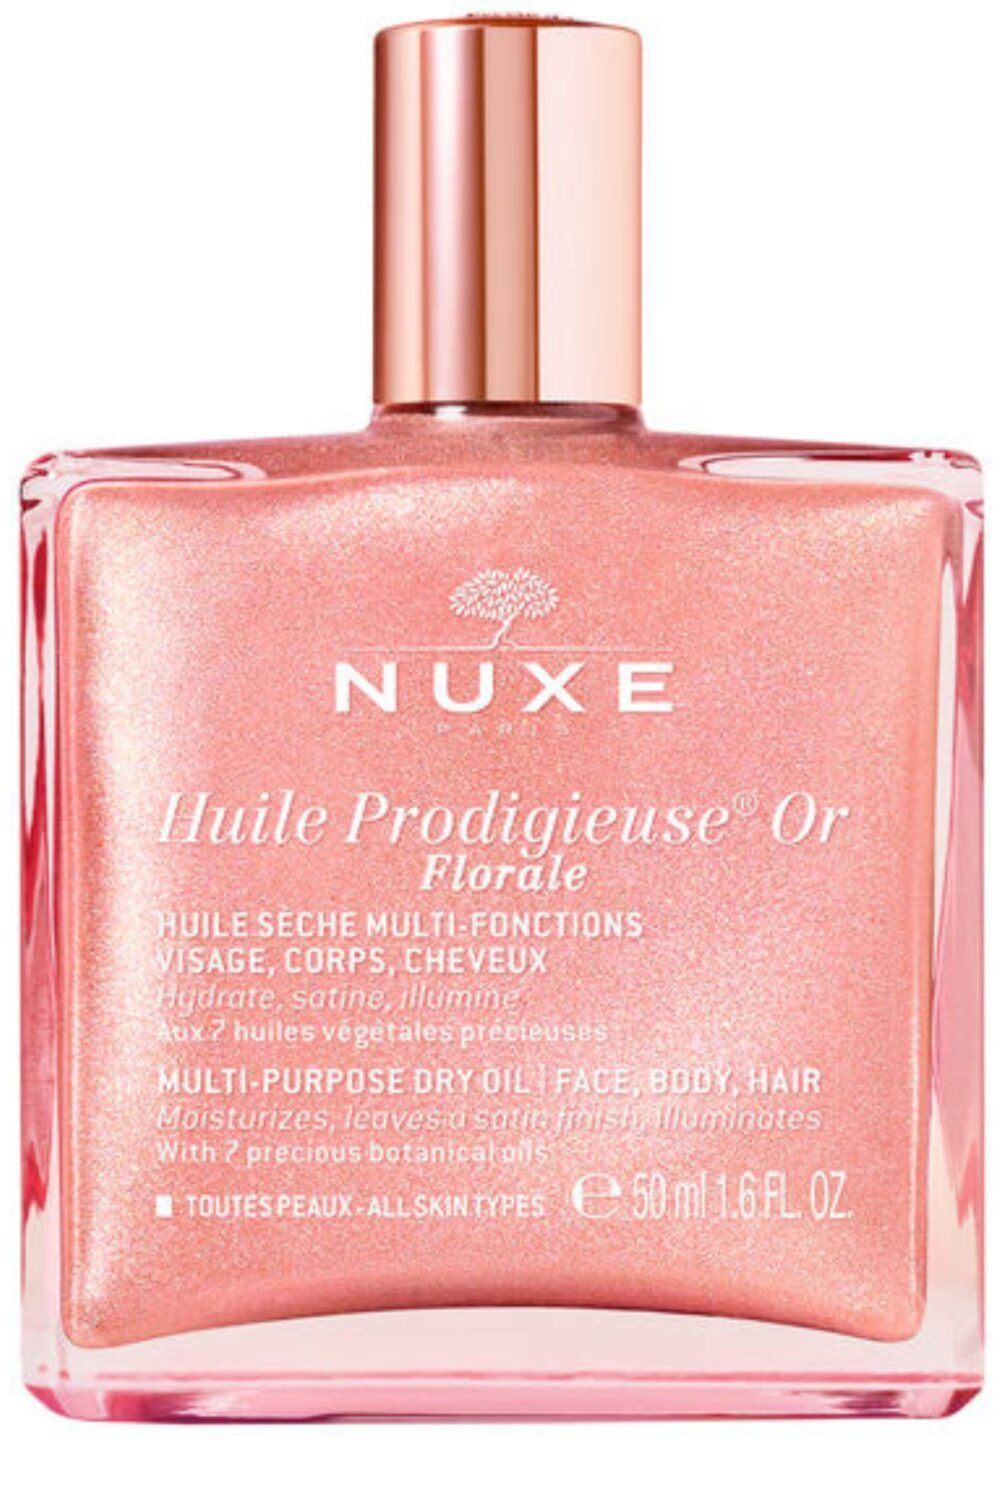 Nuxe - Huile Prodigieuse® Or Florale 50ml